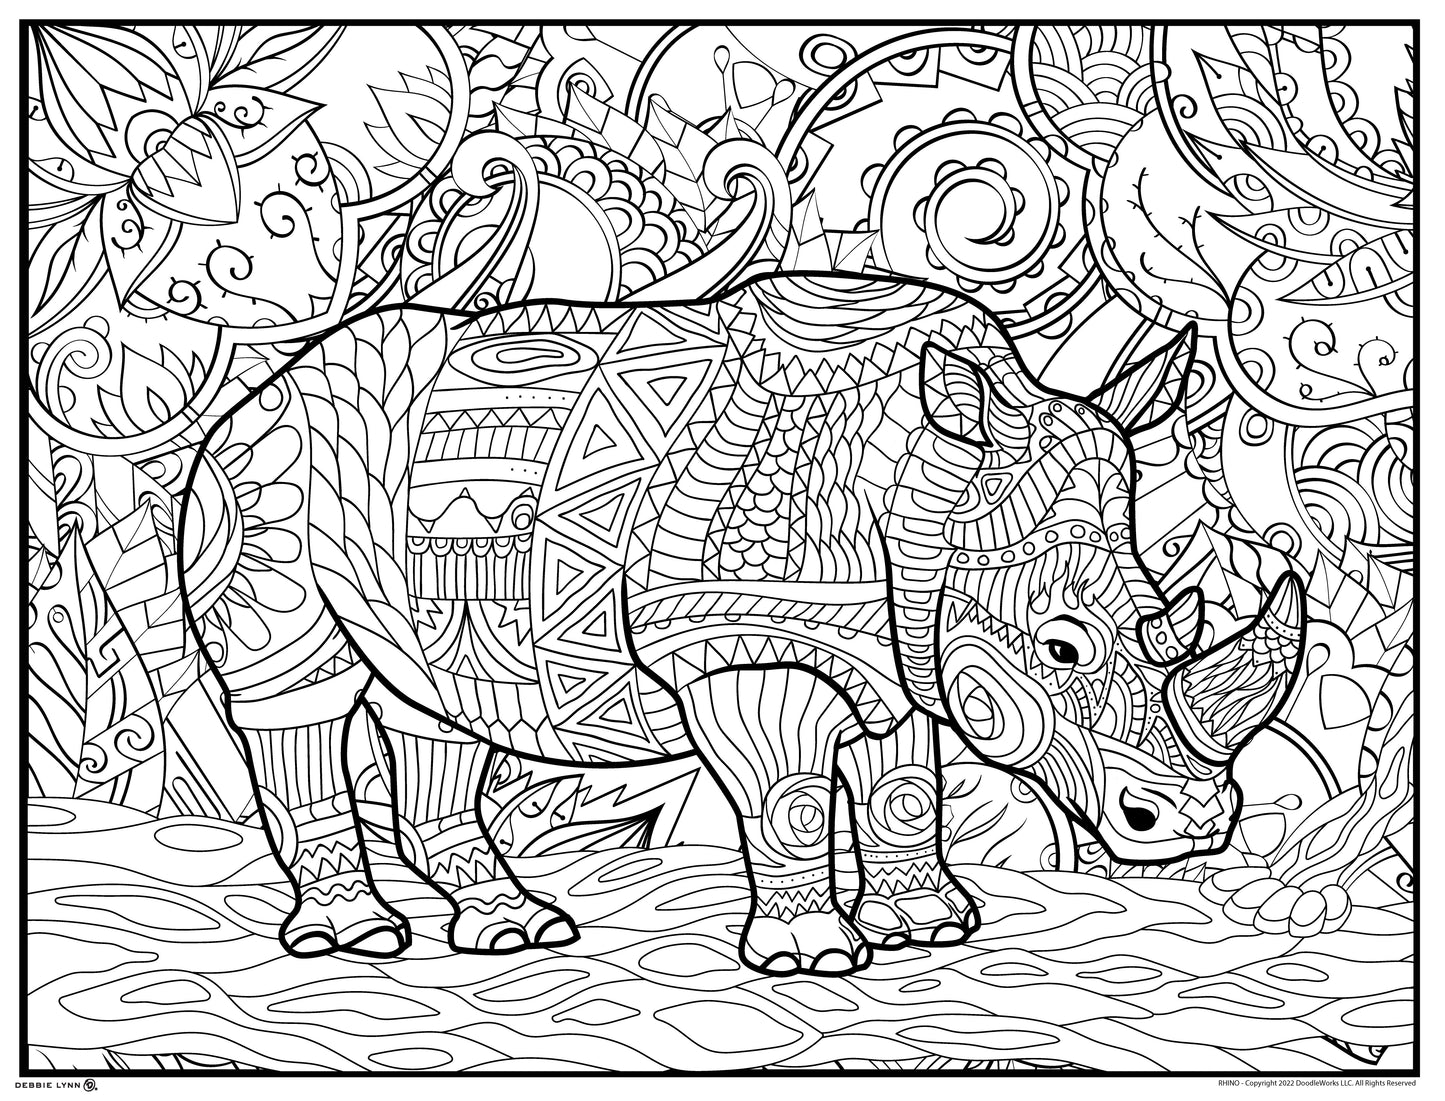 Rhino Personalized Giant Coloring Poster 46"x60"